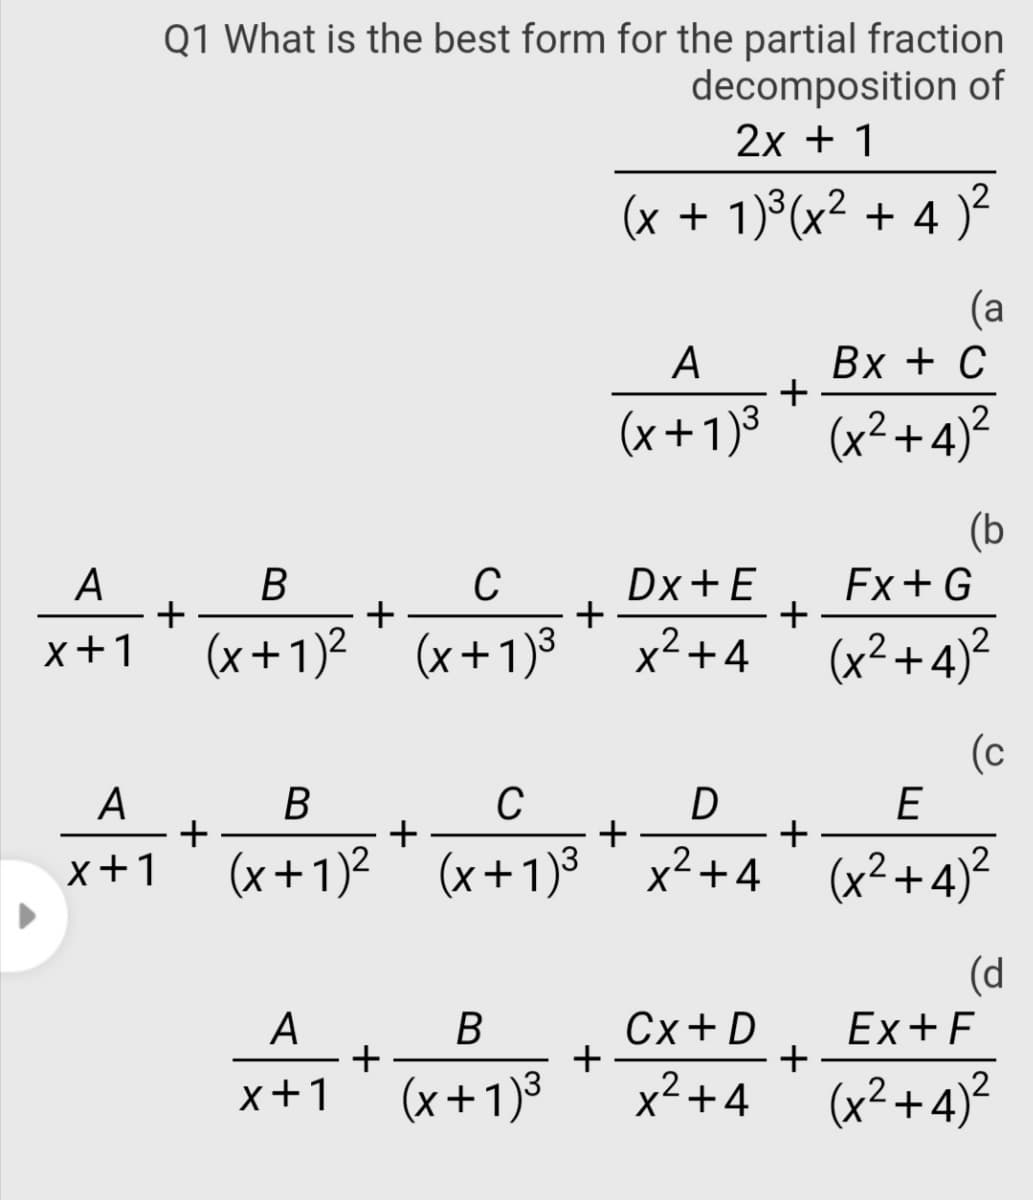 Q1 What is the best form for the partial fraction
decomposition of
2х + 1
(x + 1)°(x² + 4 )²
(a
A
Bx + C
+
(x+1)3 (x²+4)²
(b
A
+
x+1
Dx+E
+
x2+4
В
Ex+G
+
+
(x+1)2 (x+1)3
(x²+4)²
(c
E
A
В
C
D
+
+
x+1
(x+1)²
(x+1)3' x²+4
(x²+4)²
(d
A
+
x+1
Сx+ D
+
x2+4
Ex+F
+
(x+1)³
(x²+4)²
